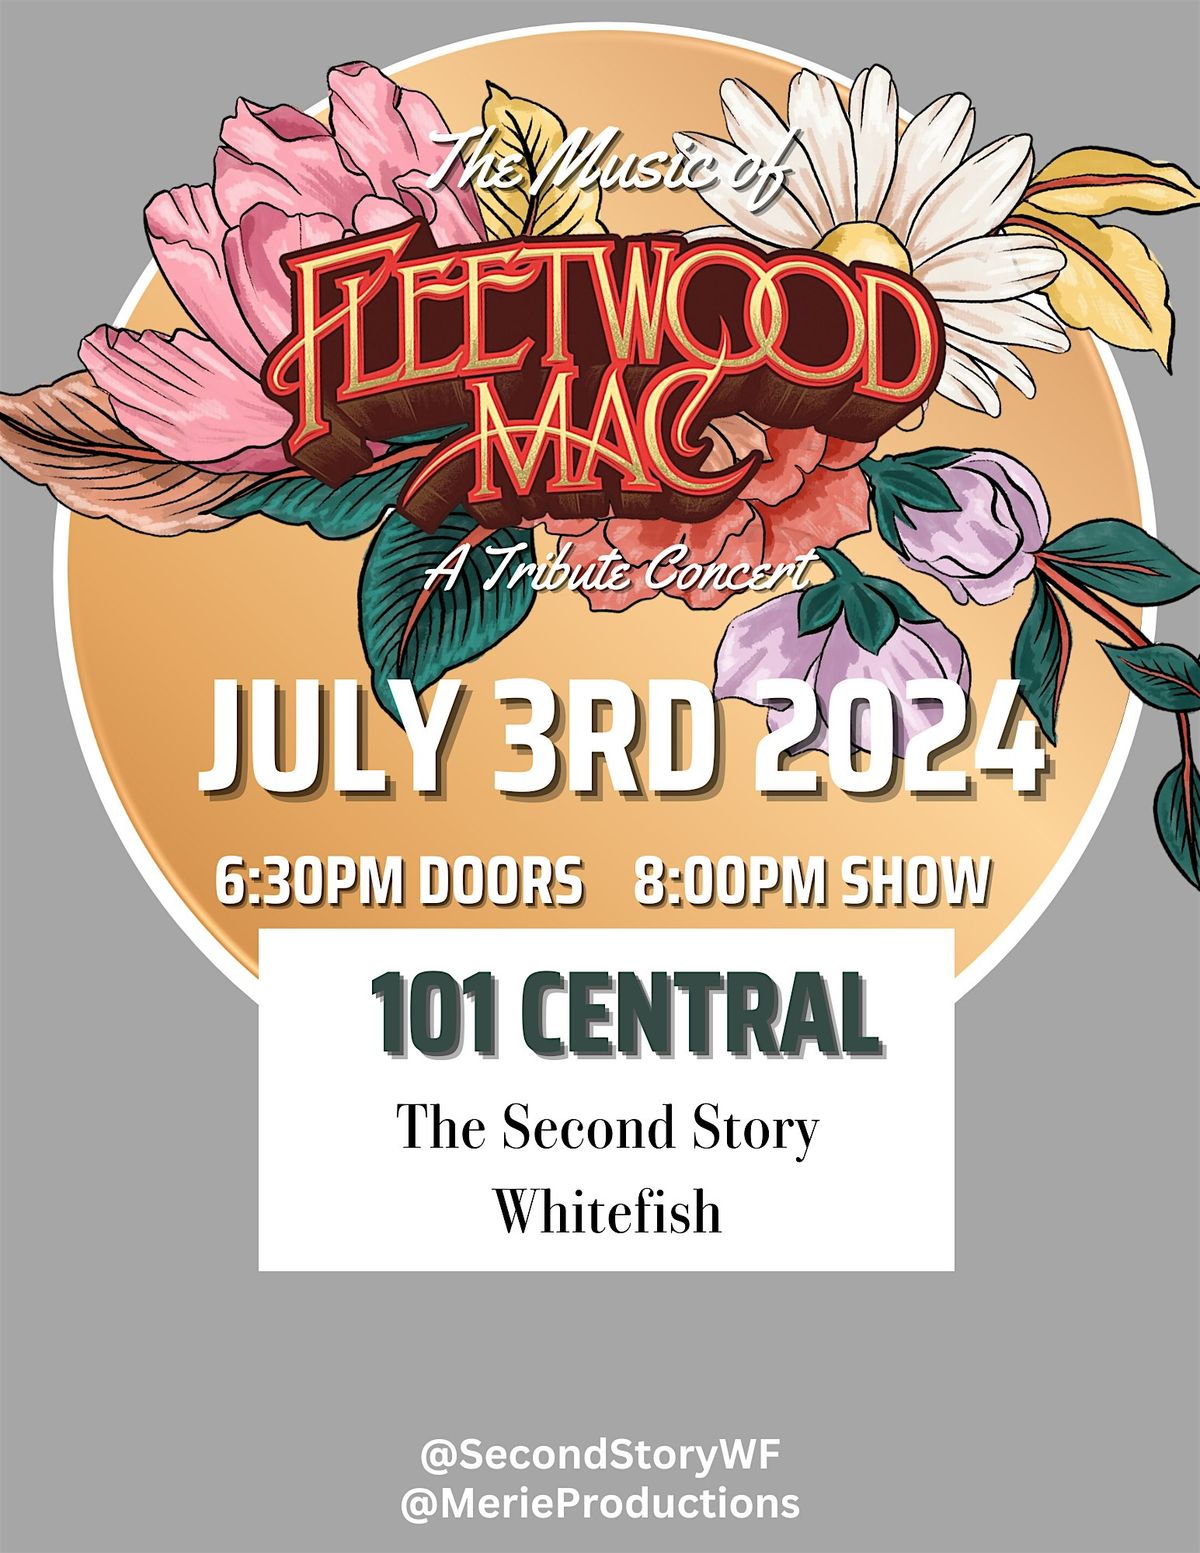 The Music of Fleetwood Mac - A Tribute Concert